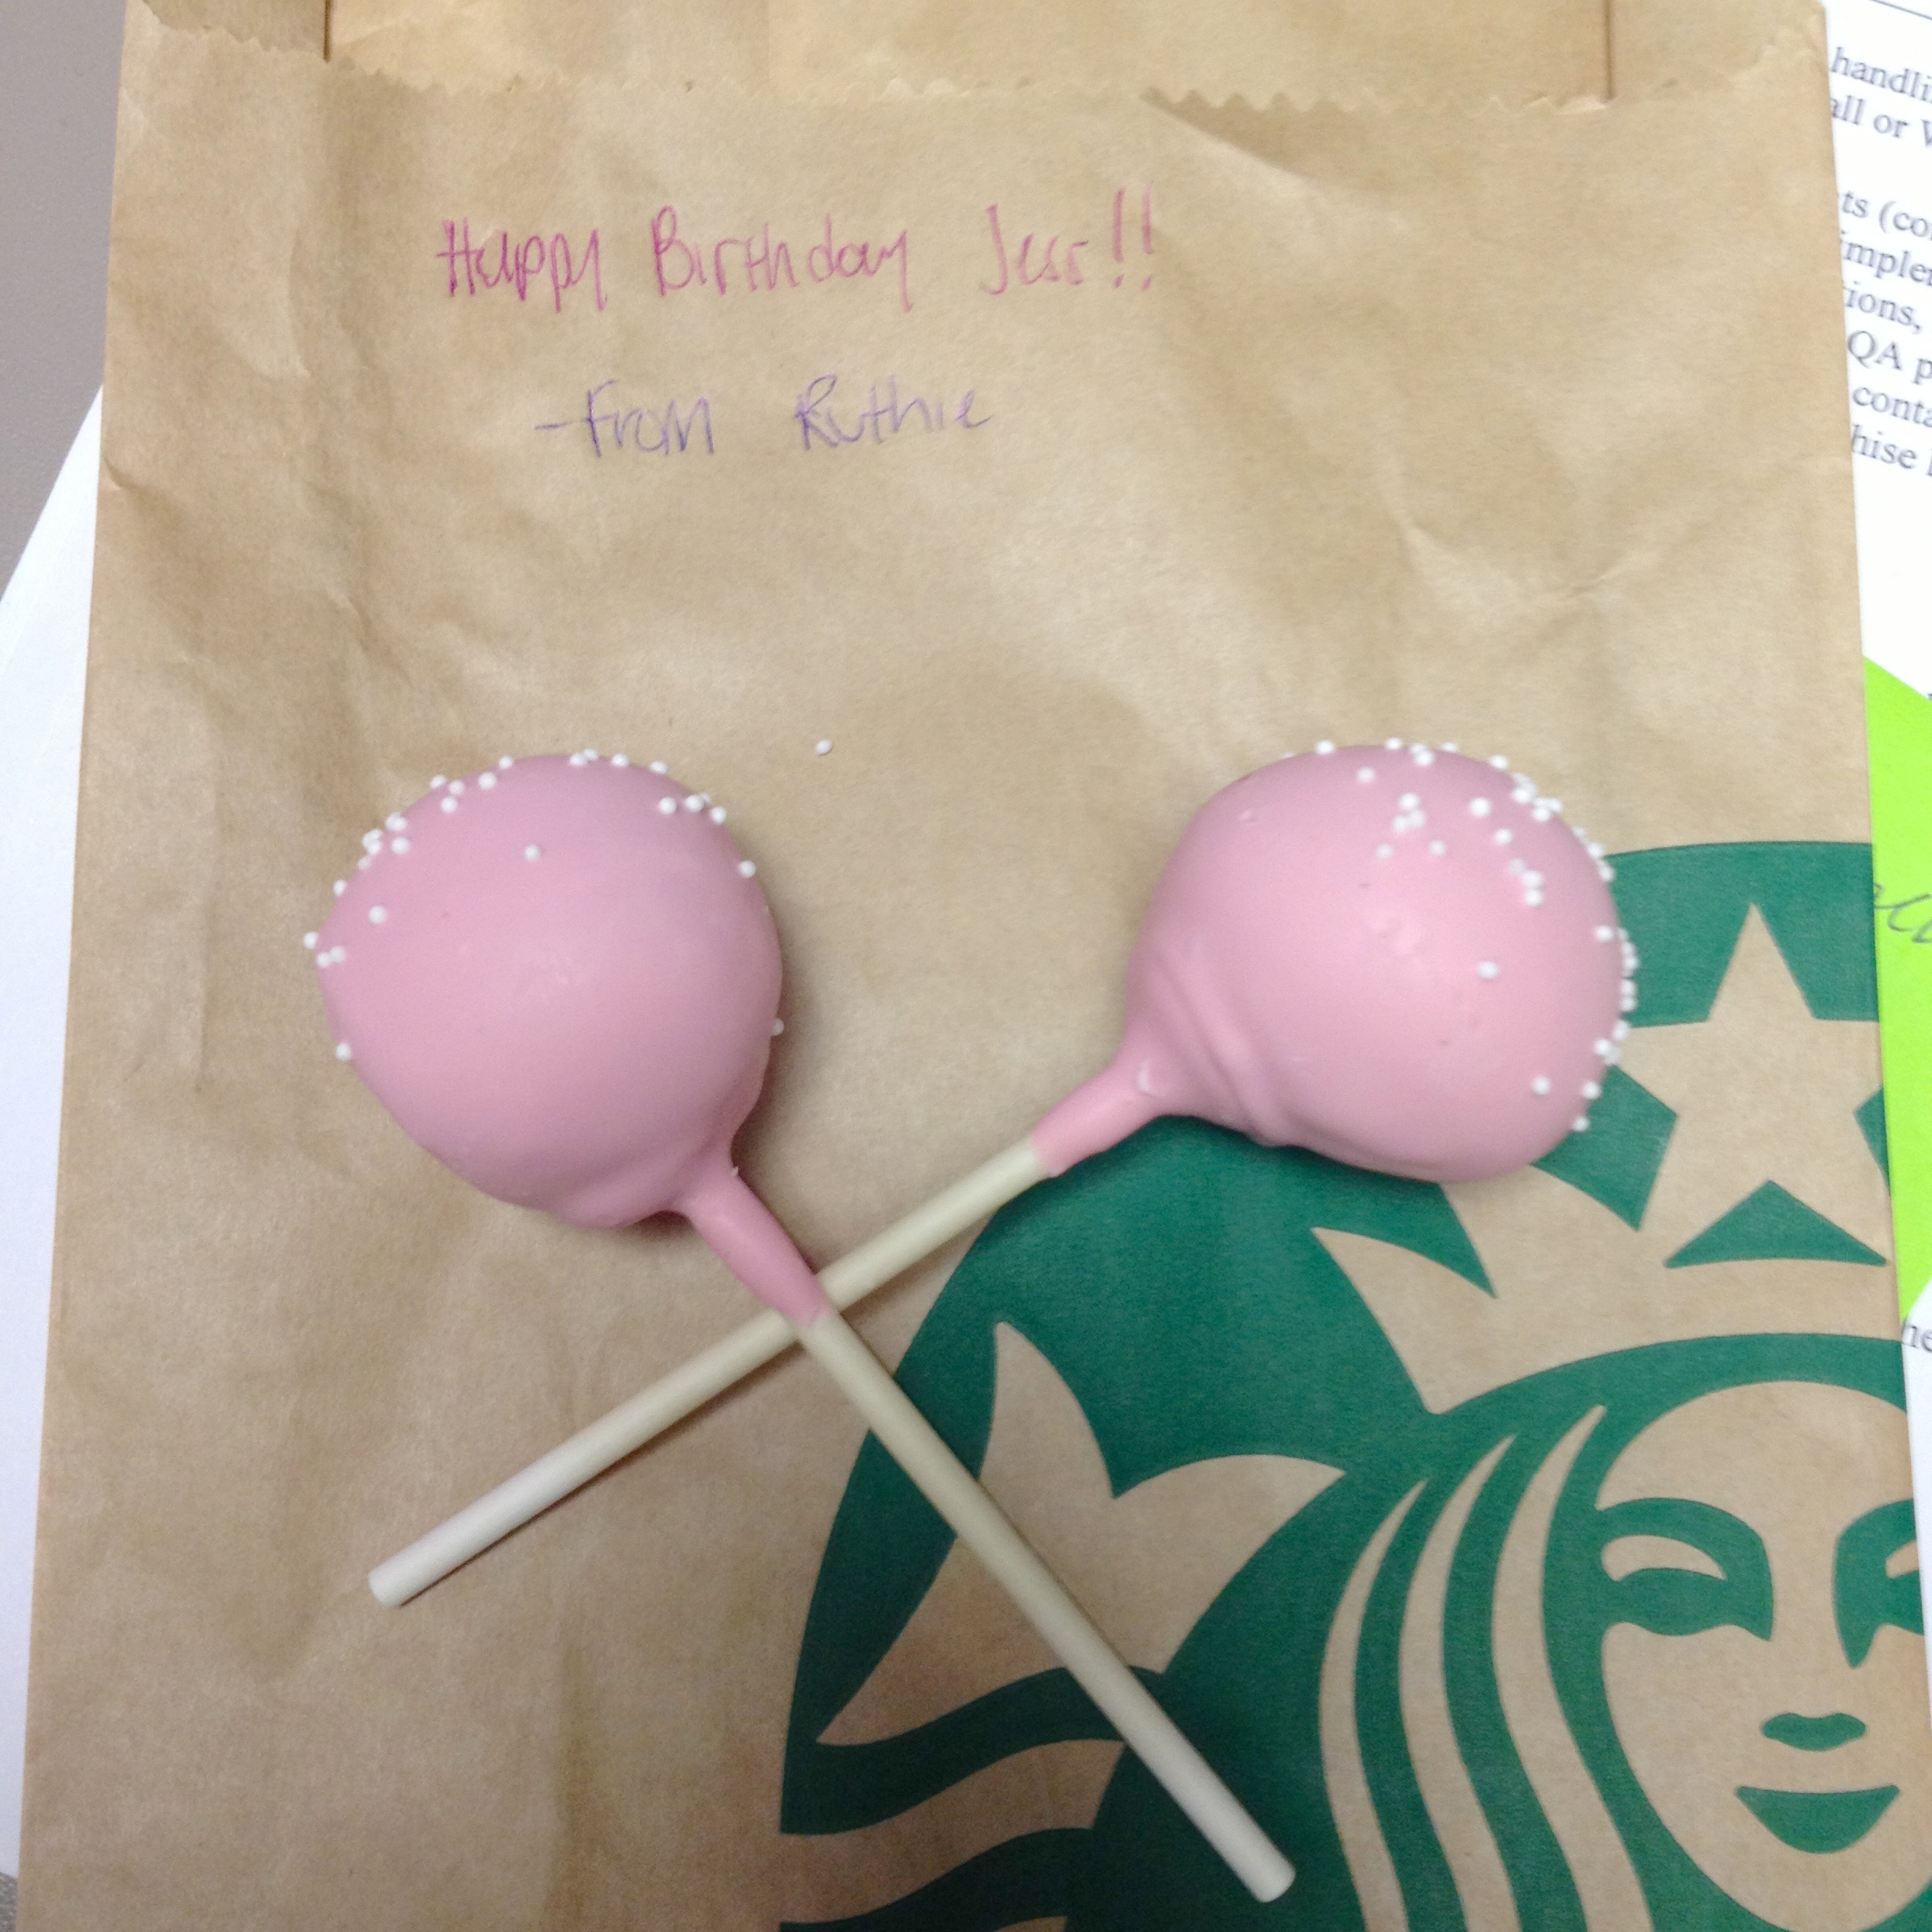 Cake Pops from Ruthie!